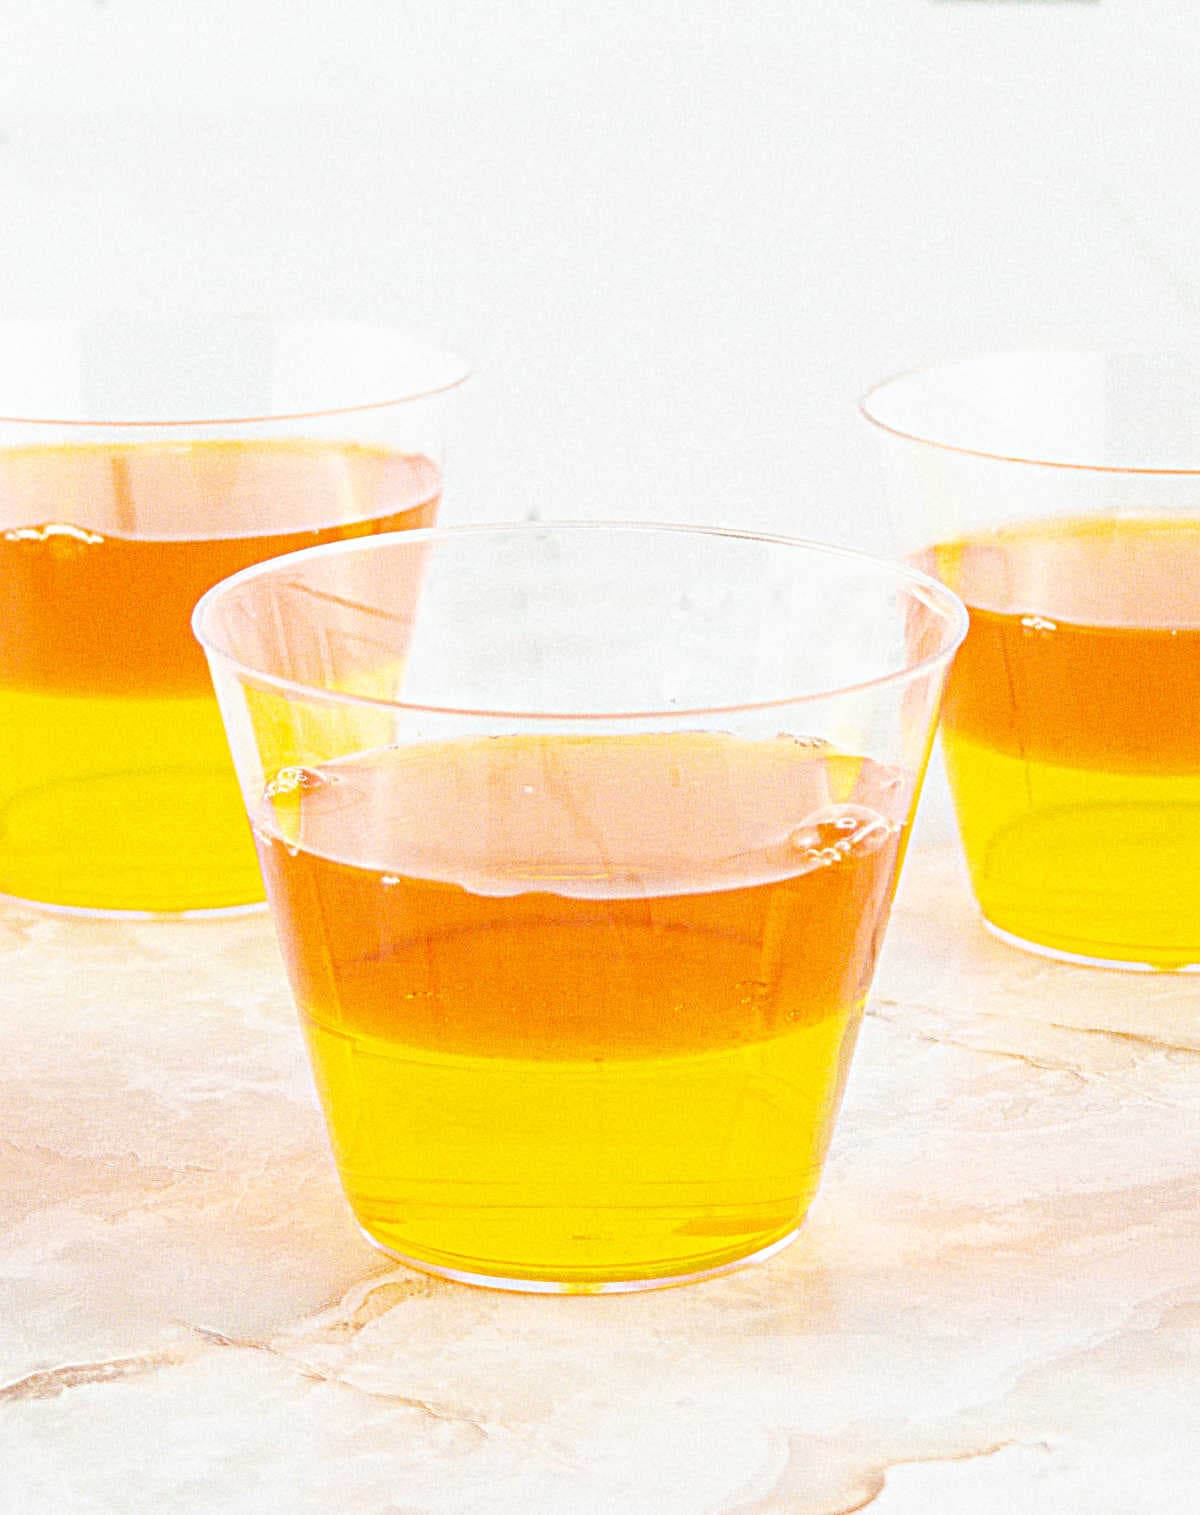 Small jello cups with layers of orange and yellow jello. White background.